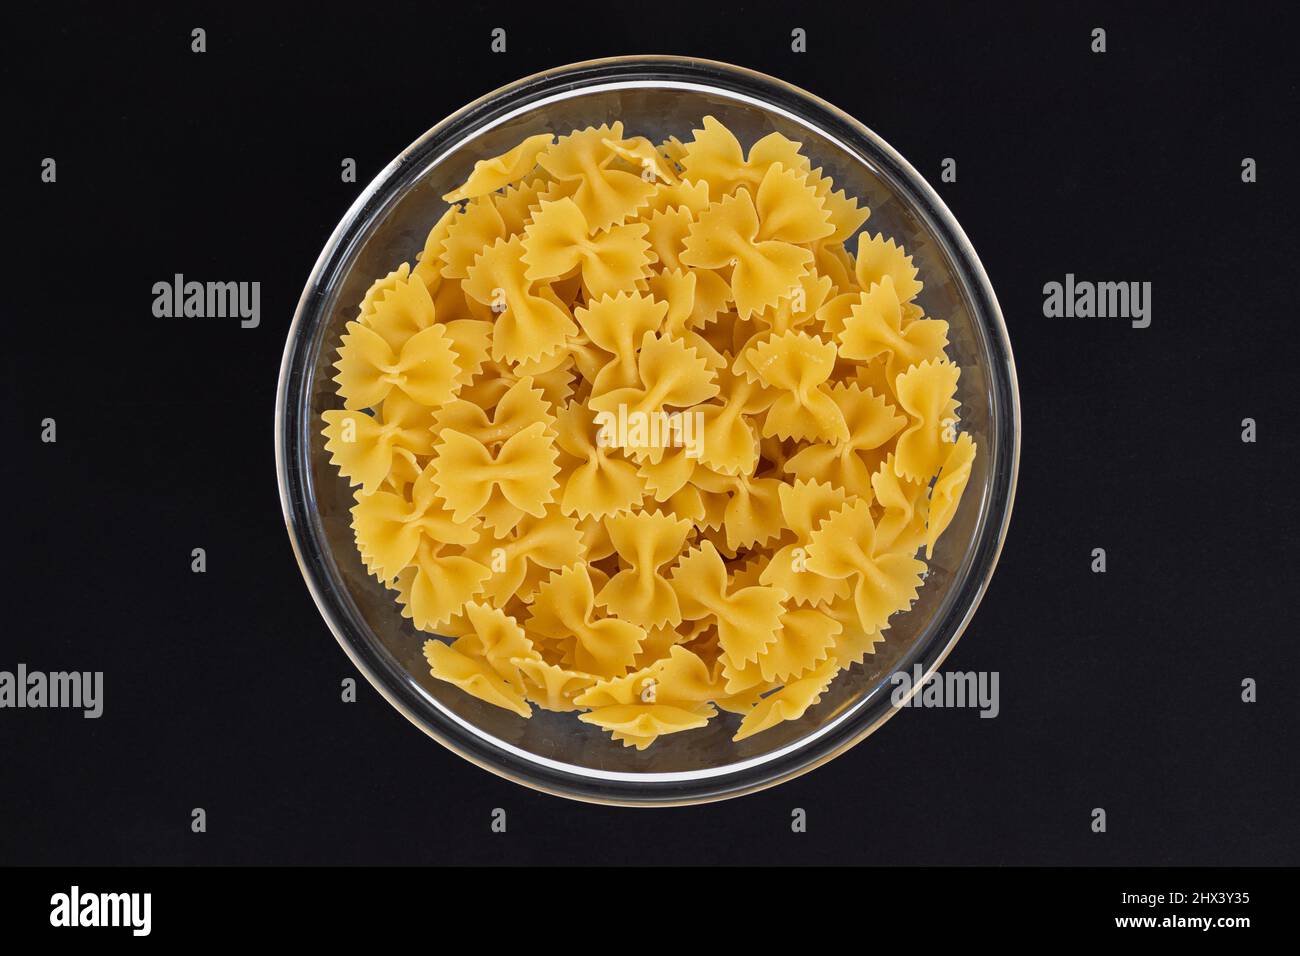 pasta farfalle in glass bowl isolated on black background, raw pasta in shape of bow, top view Stock Photo